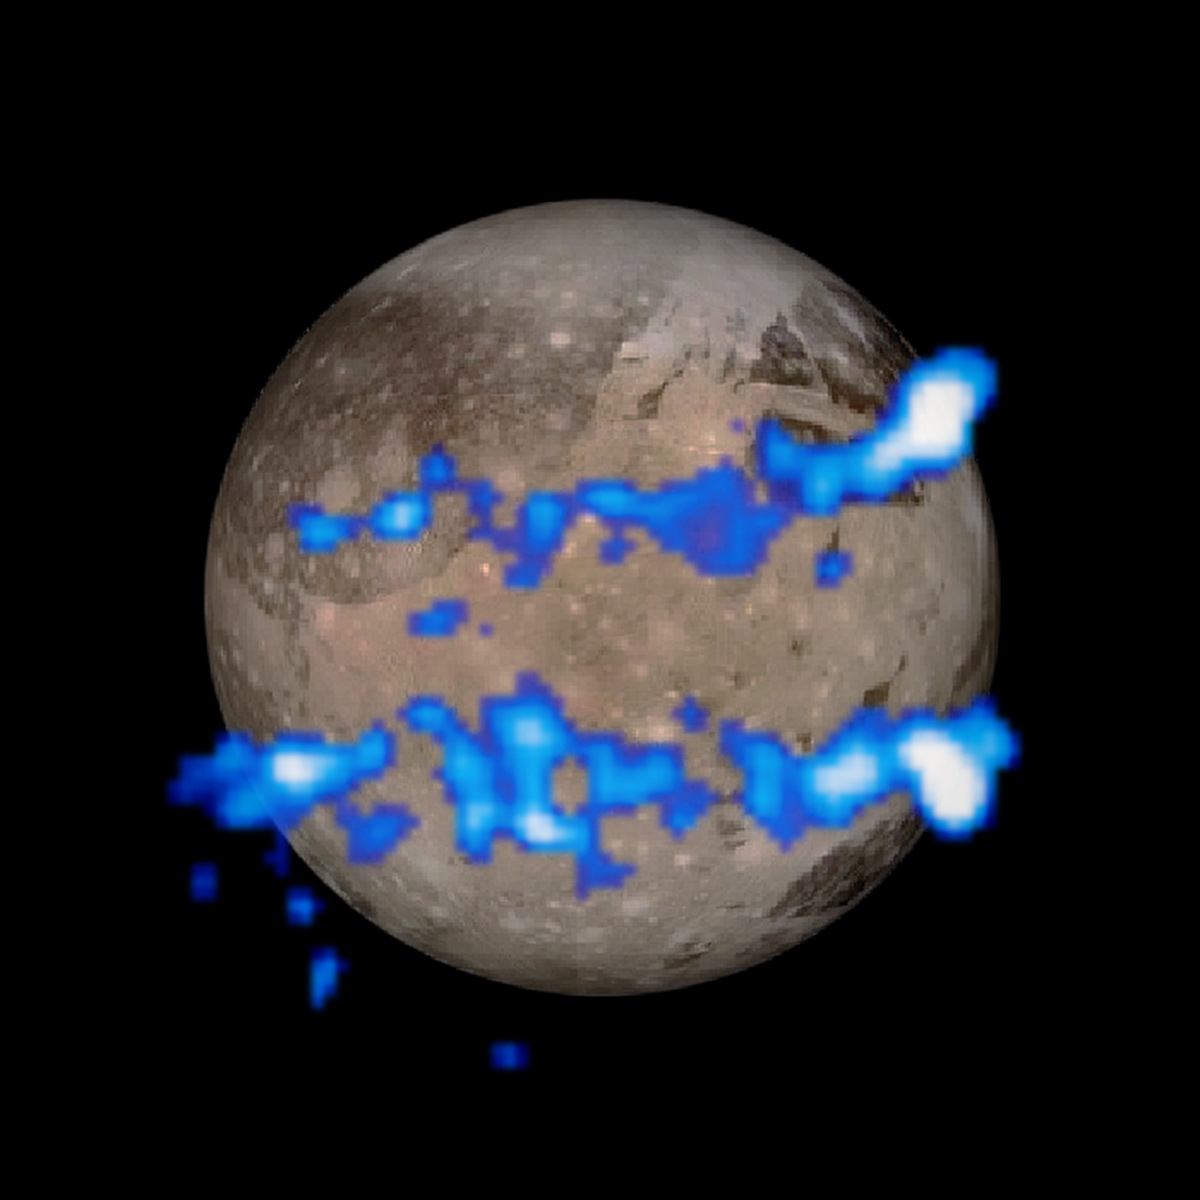 From HubbleSite: "NASA's Hubble Space Telescope observed a pair of auroral belts encircling the Jovian moon Ganymede. The belts were observed in ultraviolet light by the Space Telescope Imaging Spectrograph and are colored blue in this illustration. They are overlaid on a visible-light image of Ganymede taken by NASA's Galileo orbiter. The locations of the glowing aurorae are determined by the moon's magnetic field, and therefore provide a probe of the moon's interior, where the magnetic field is generated. The amount of rocking of the magnetic field, caused by its interaction with Jupiter's own immense magnetosphere, provides evidence that the moon has a subsurface ocean of saline water." Image Credit: NASA, ESA, and J. Saur (University of Cologne, Germany)